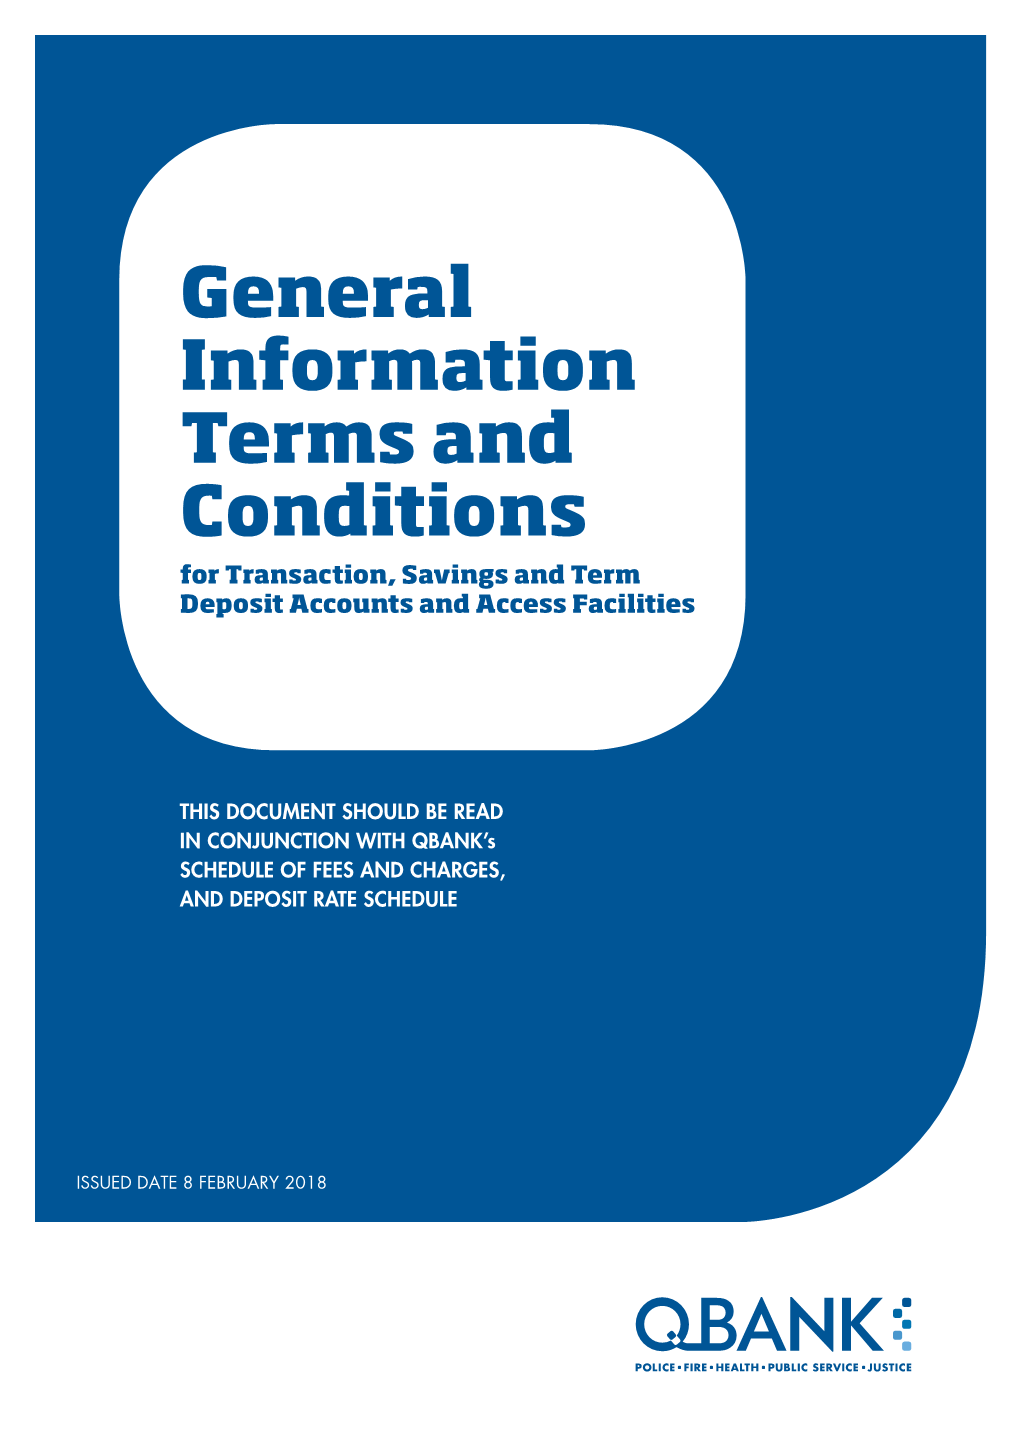 General Information Terms and Conditions for Transaction, Savings and Term Deposit Accounts and Access Facilities